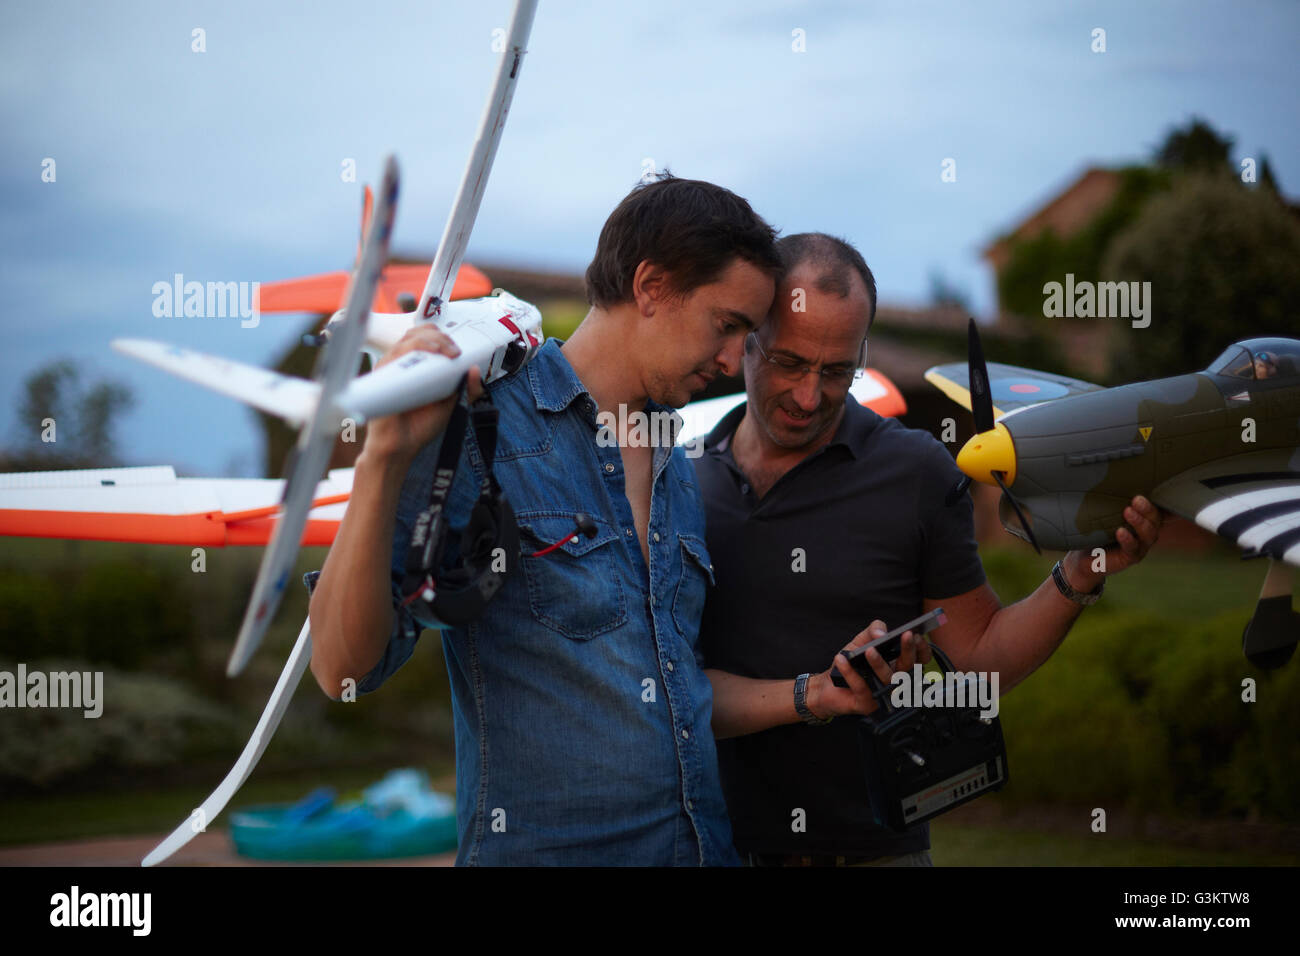 Two male friends holding remote control planes, looking at smartphone Stock Photo